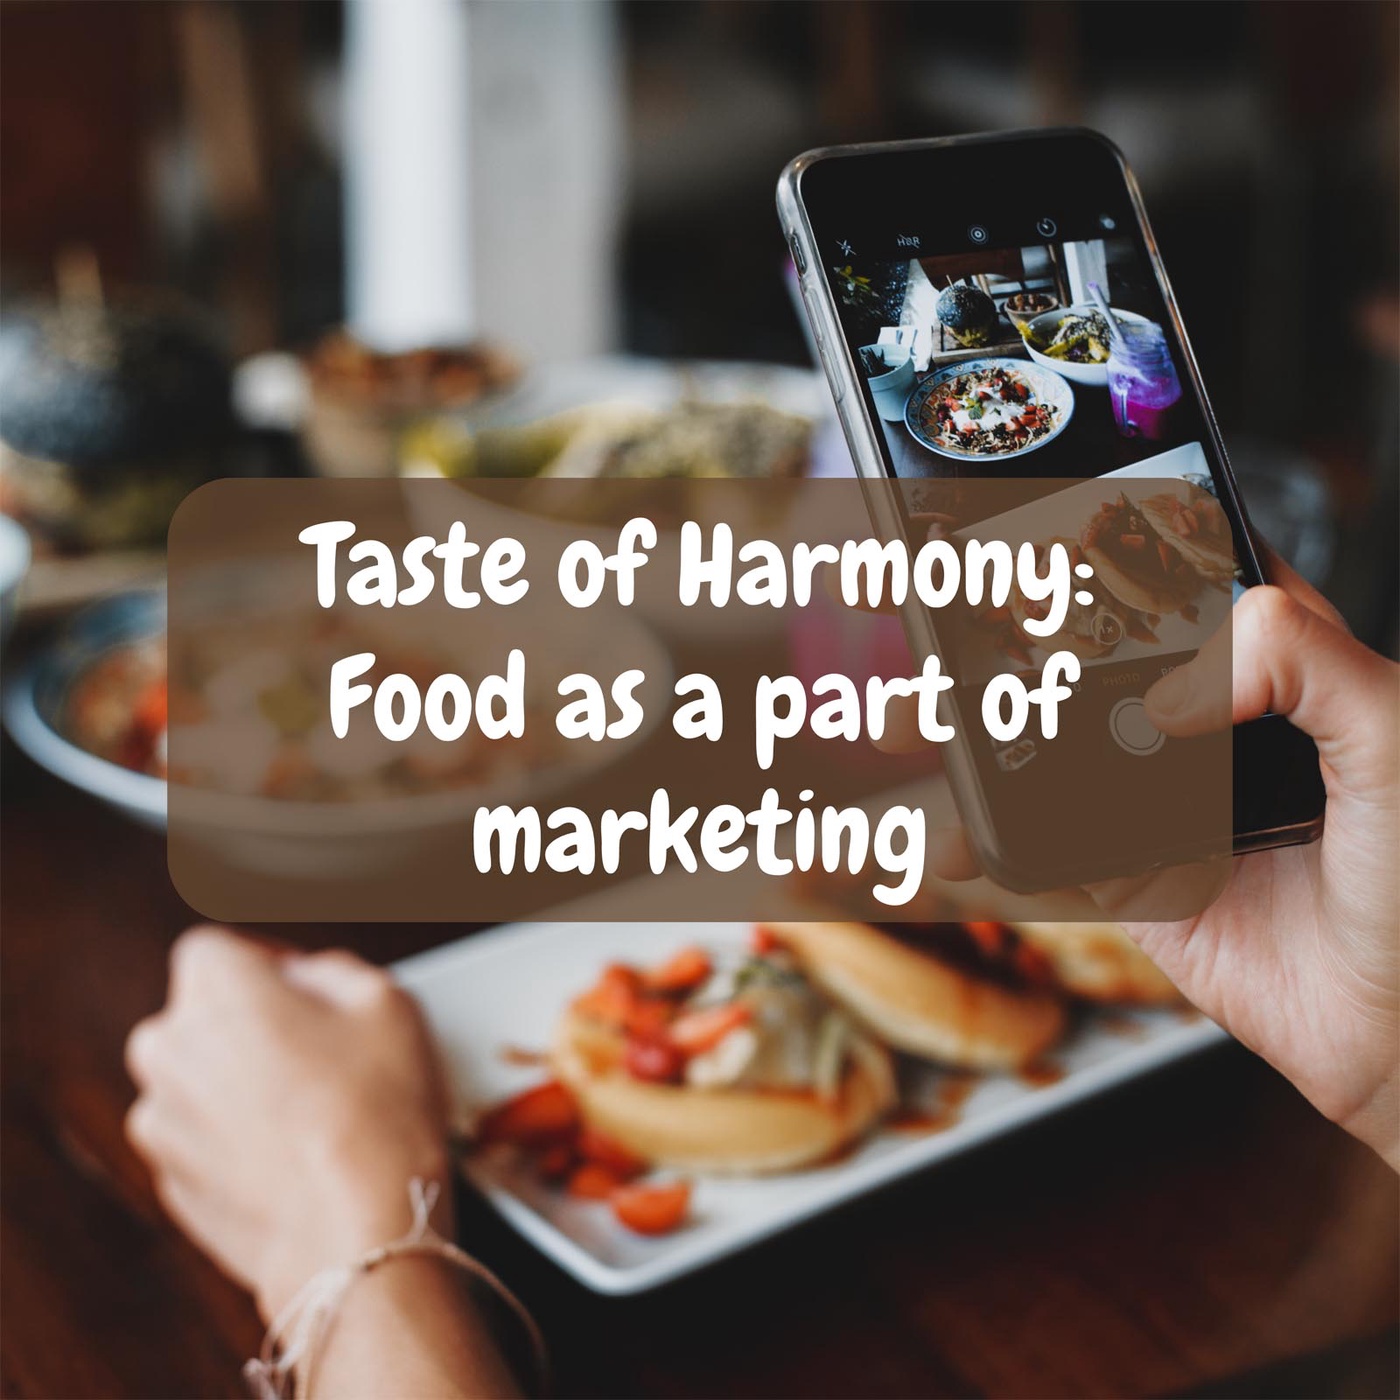 Food and marketing